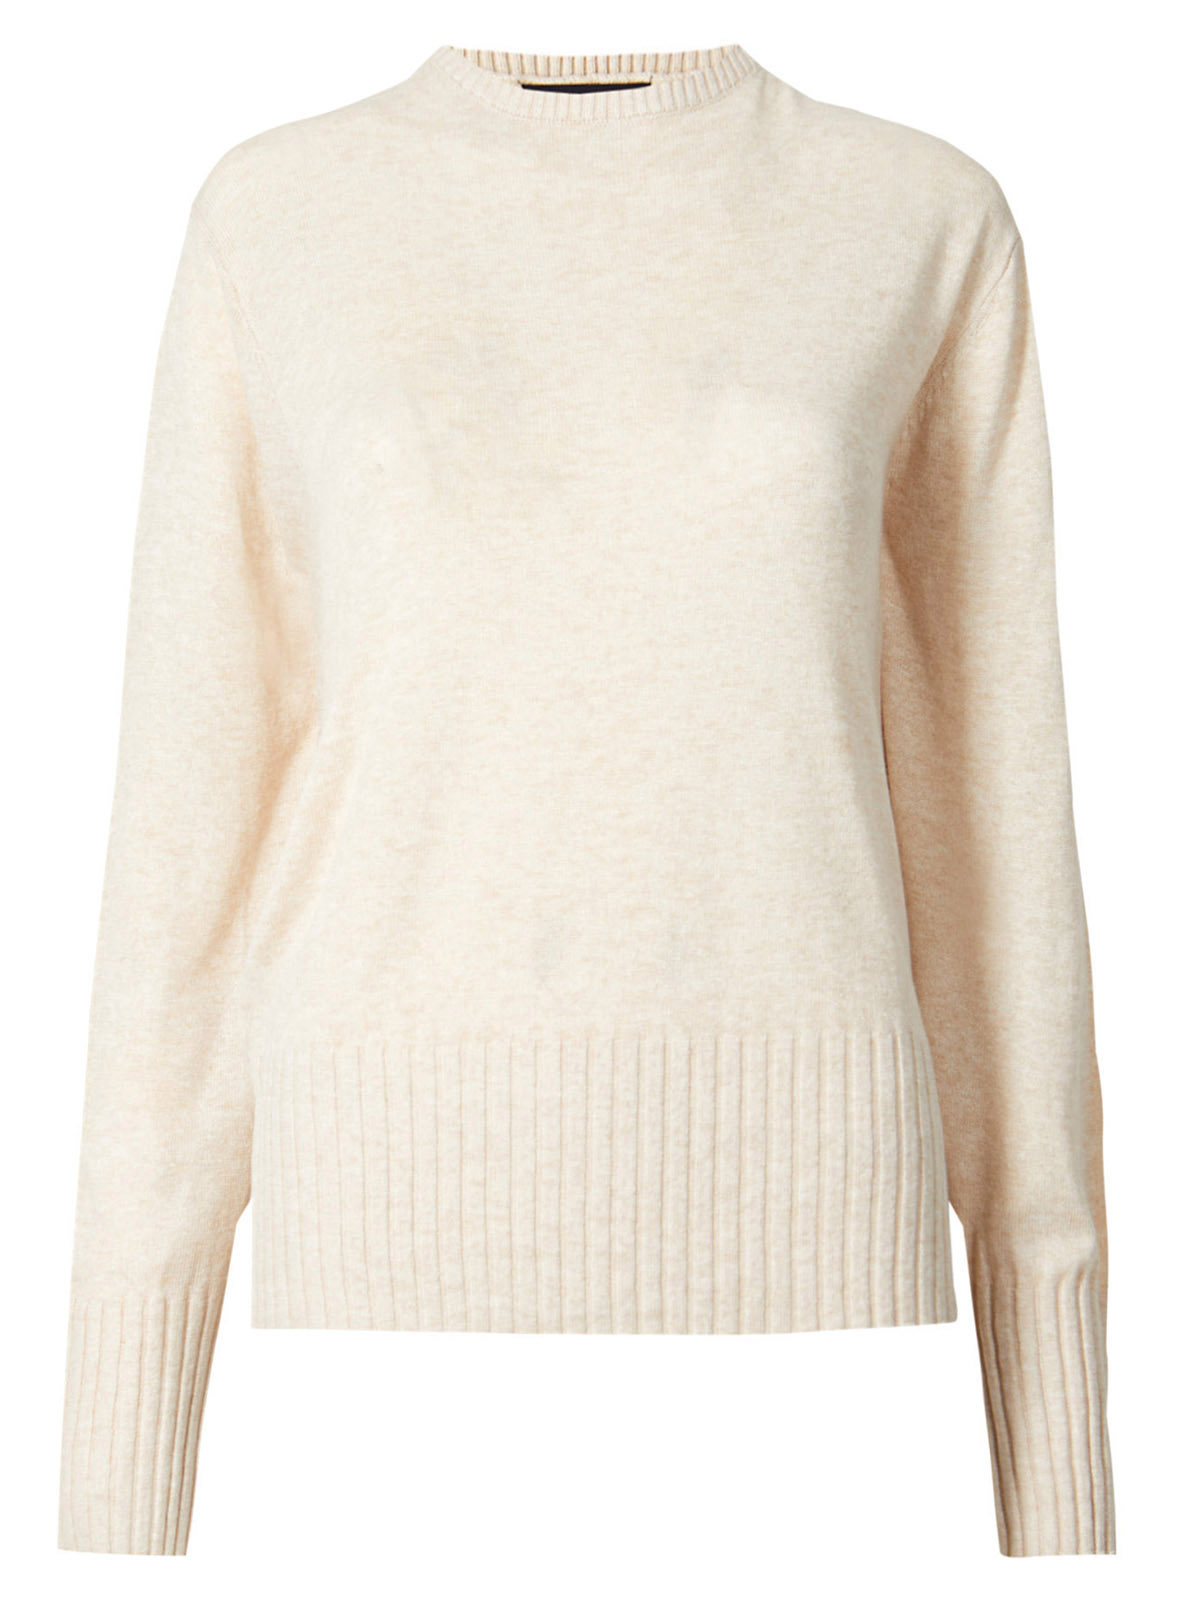 Marks and Spencer - - M&5 OATMEAL Linen Blend Round Neck Batwing Jumper ...